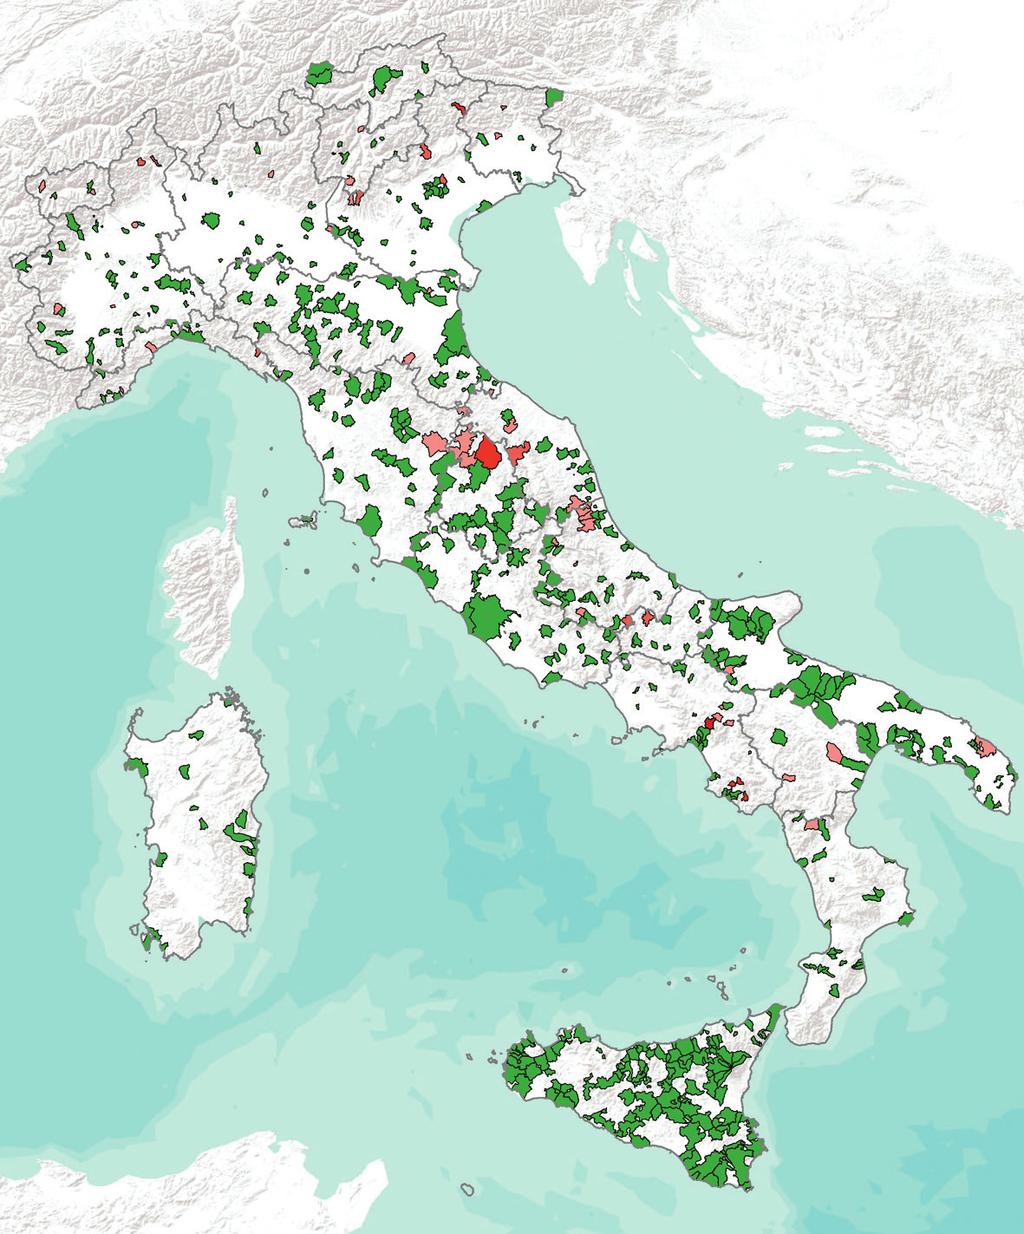 C. obsoletus group in Italy Culicoides dewulfi 1-1 11-5 51-15 151-189 Culicoides chiopterus 1-9 1-1 Figure 4. Abundance and distribution map of C. chiopterus in Italy. Figure 3.